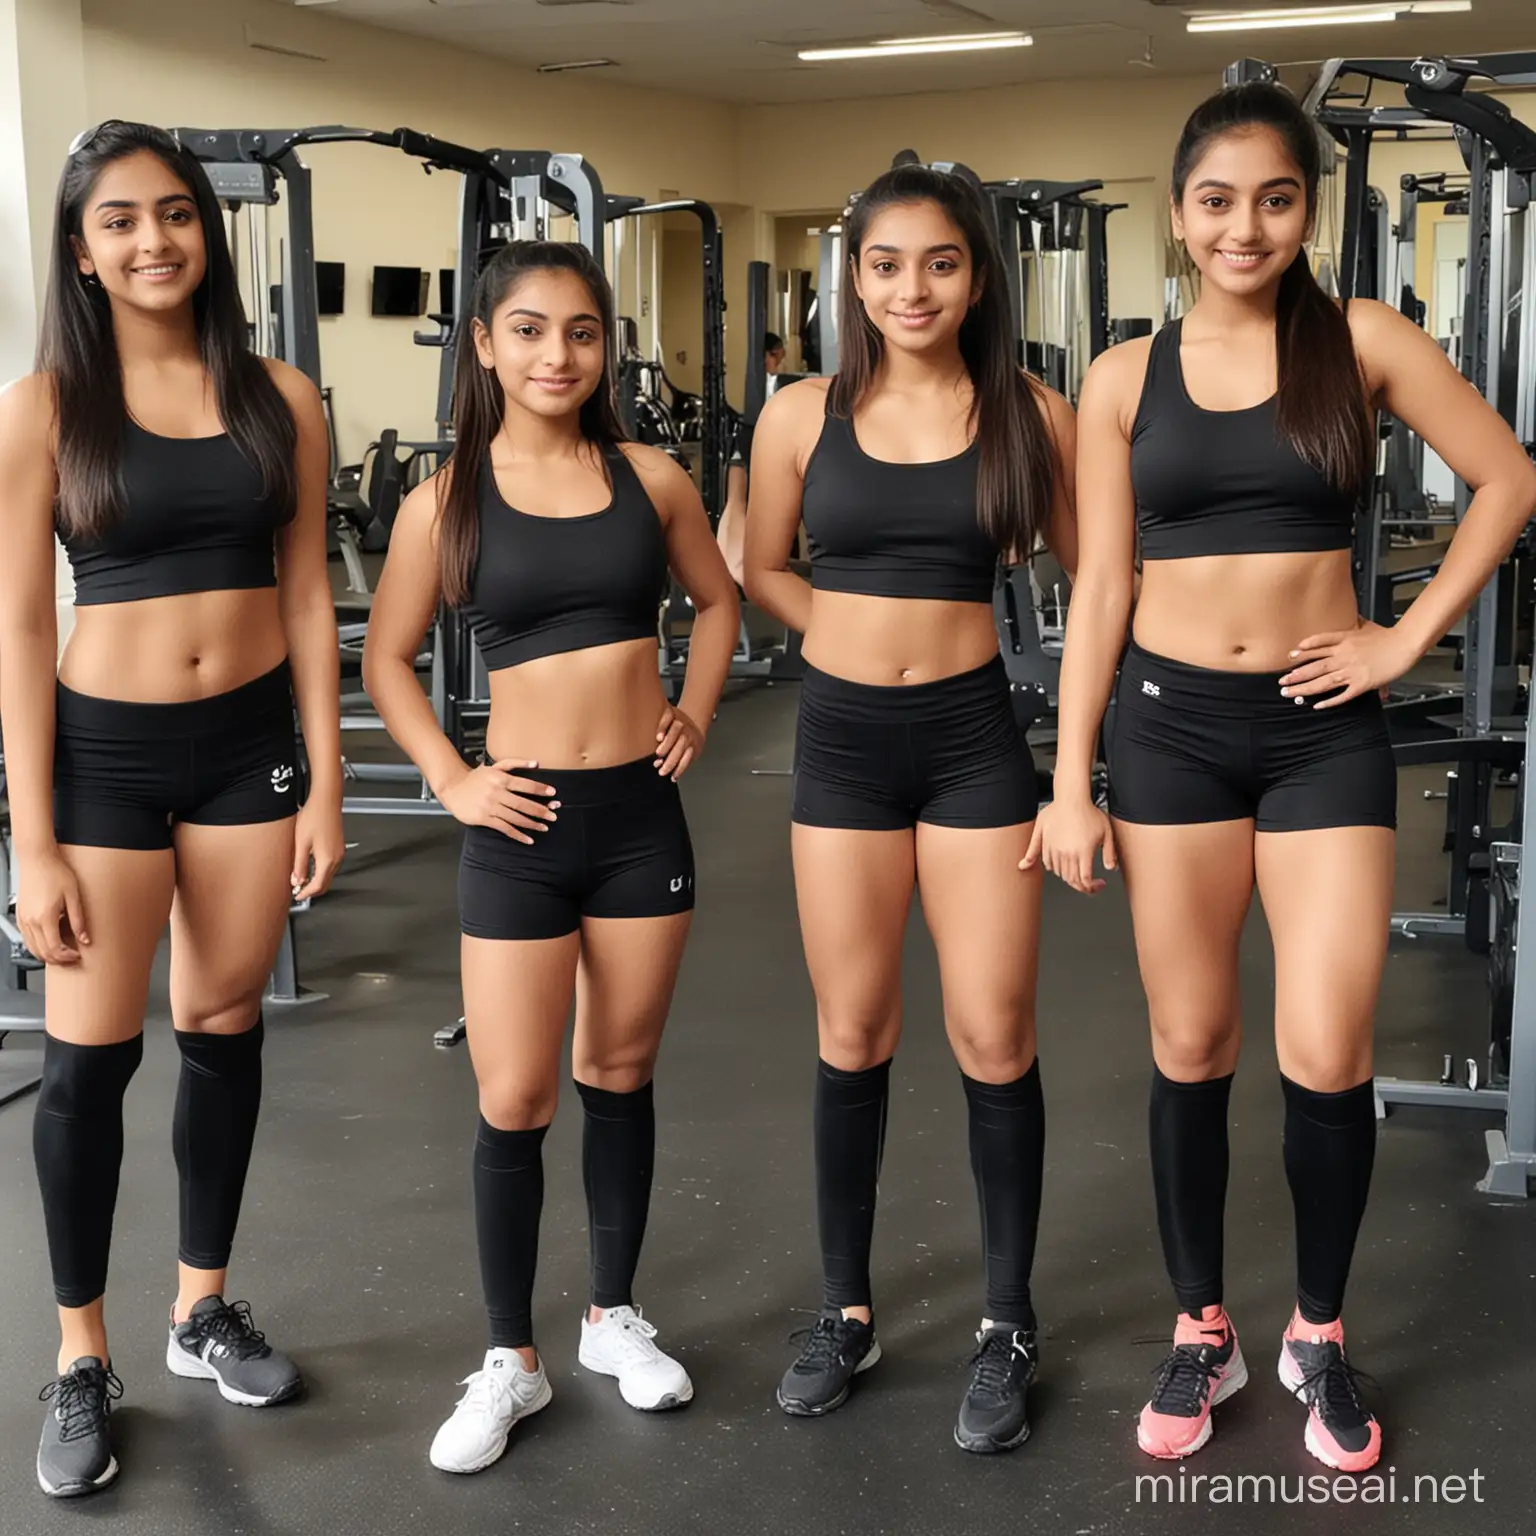 Indian High School Girls in Black Gym Shorts Exercise Together